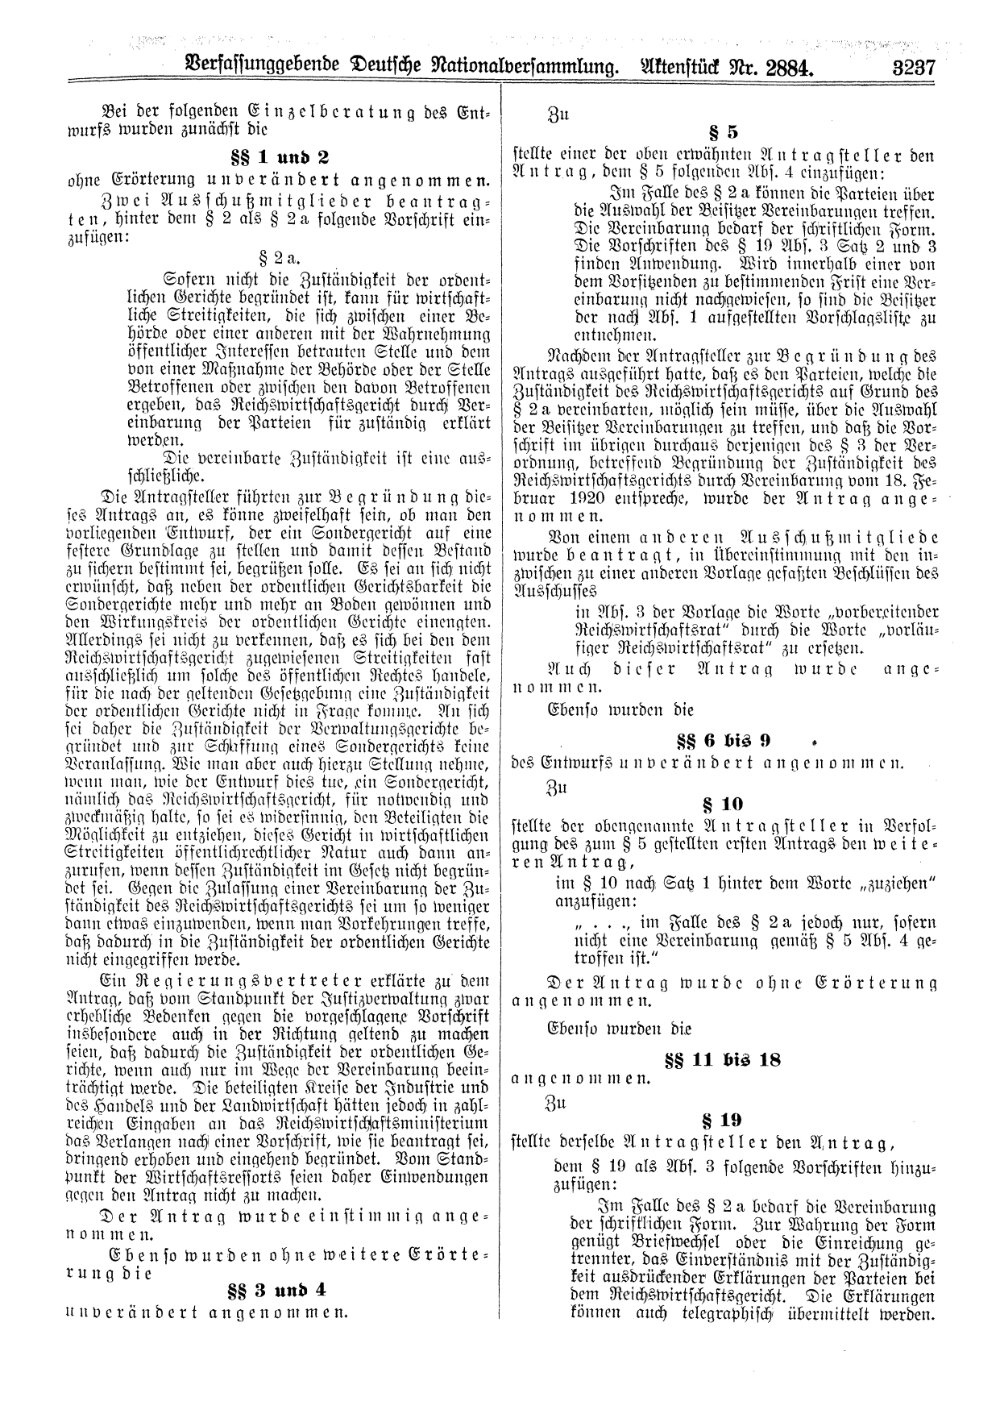 Scan of page 3237